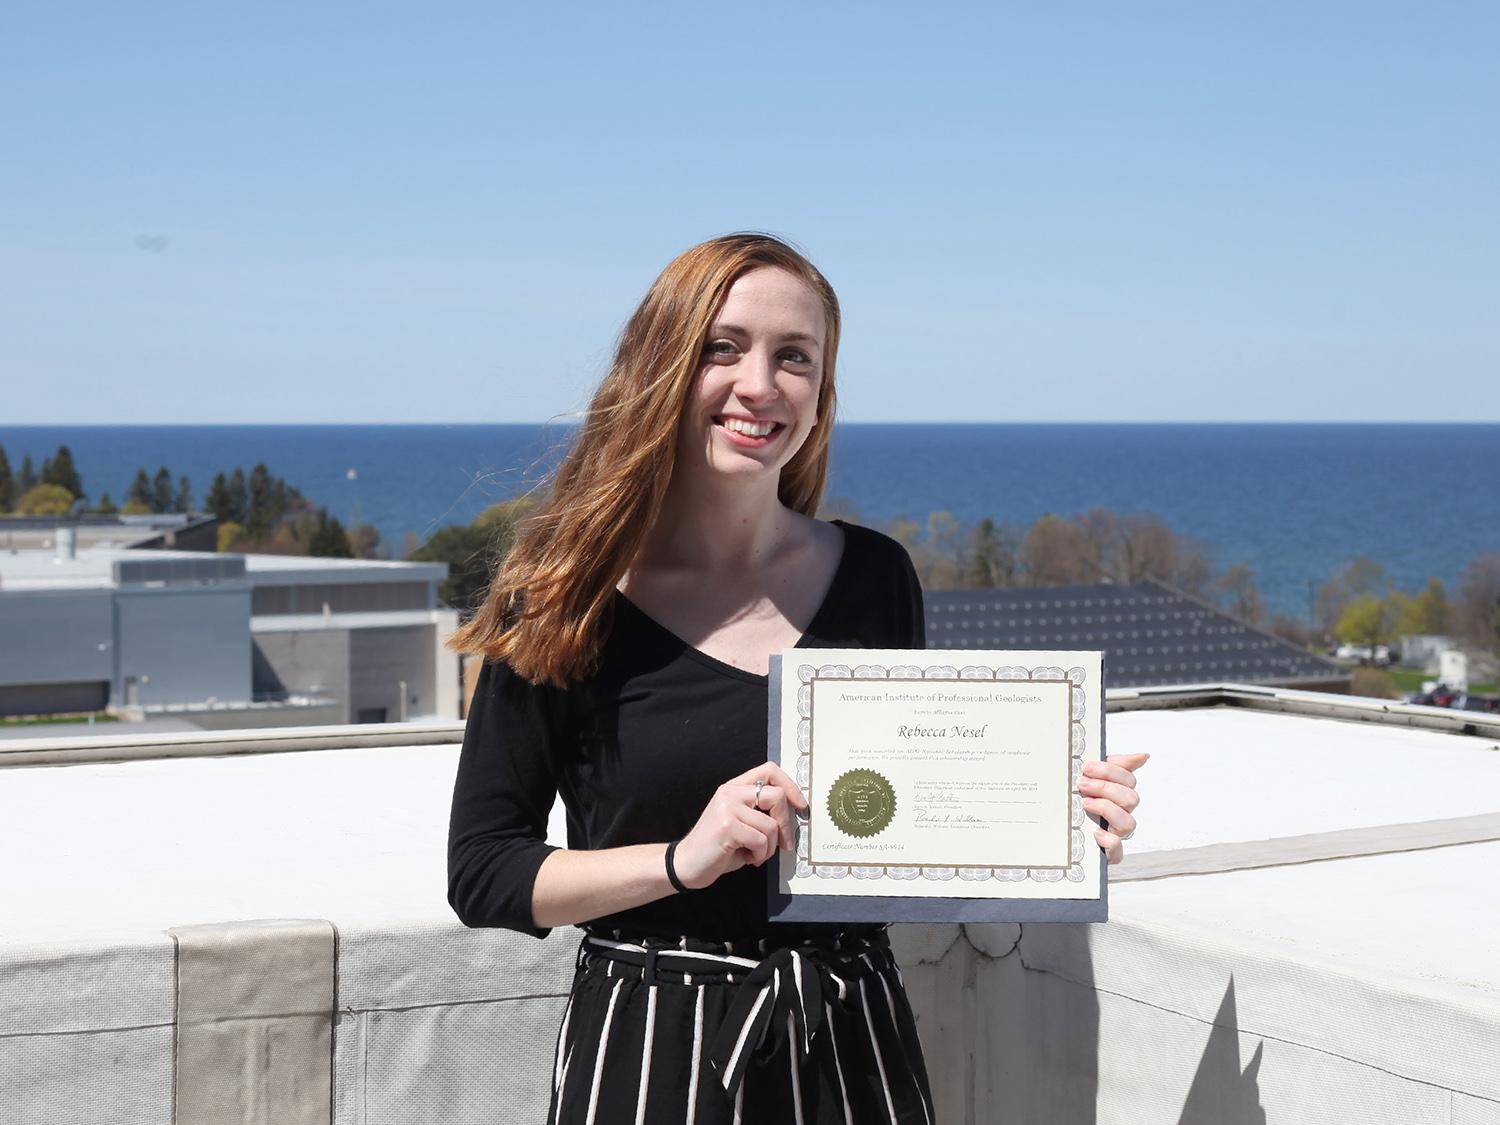 Rebecca Nesel received a National Student Scholarship from the American Institute of Professional Geologists